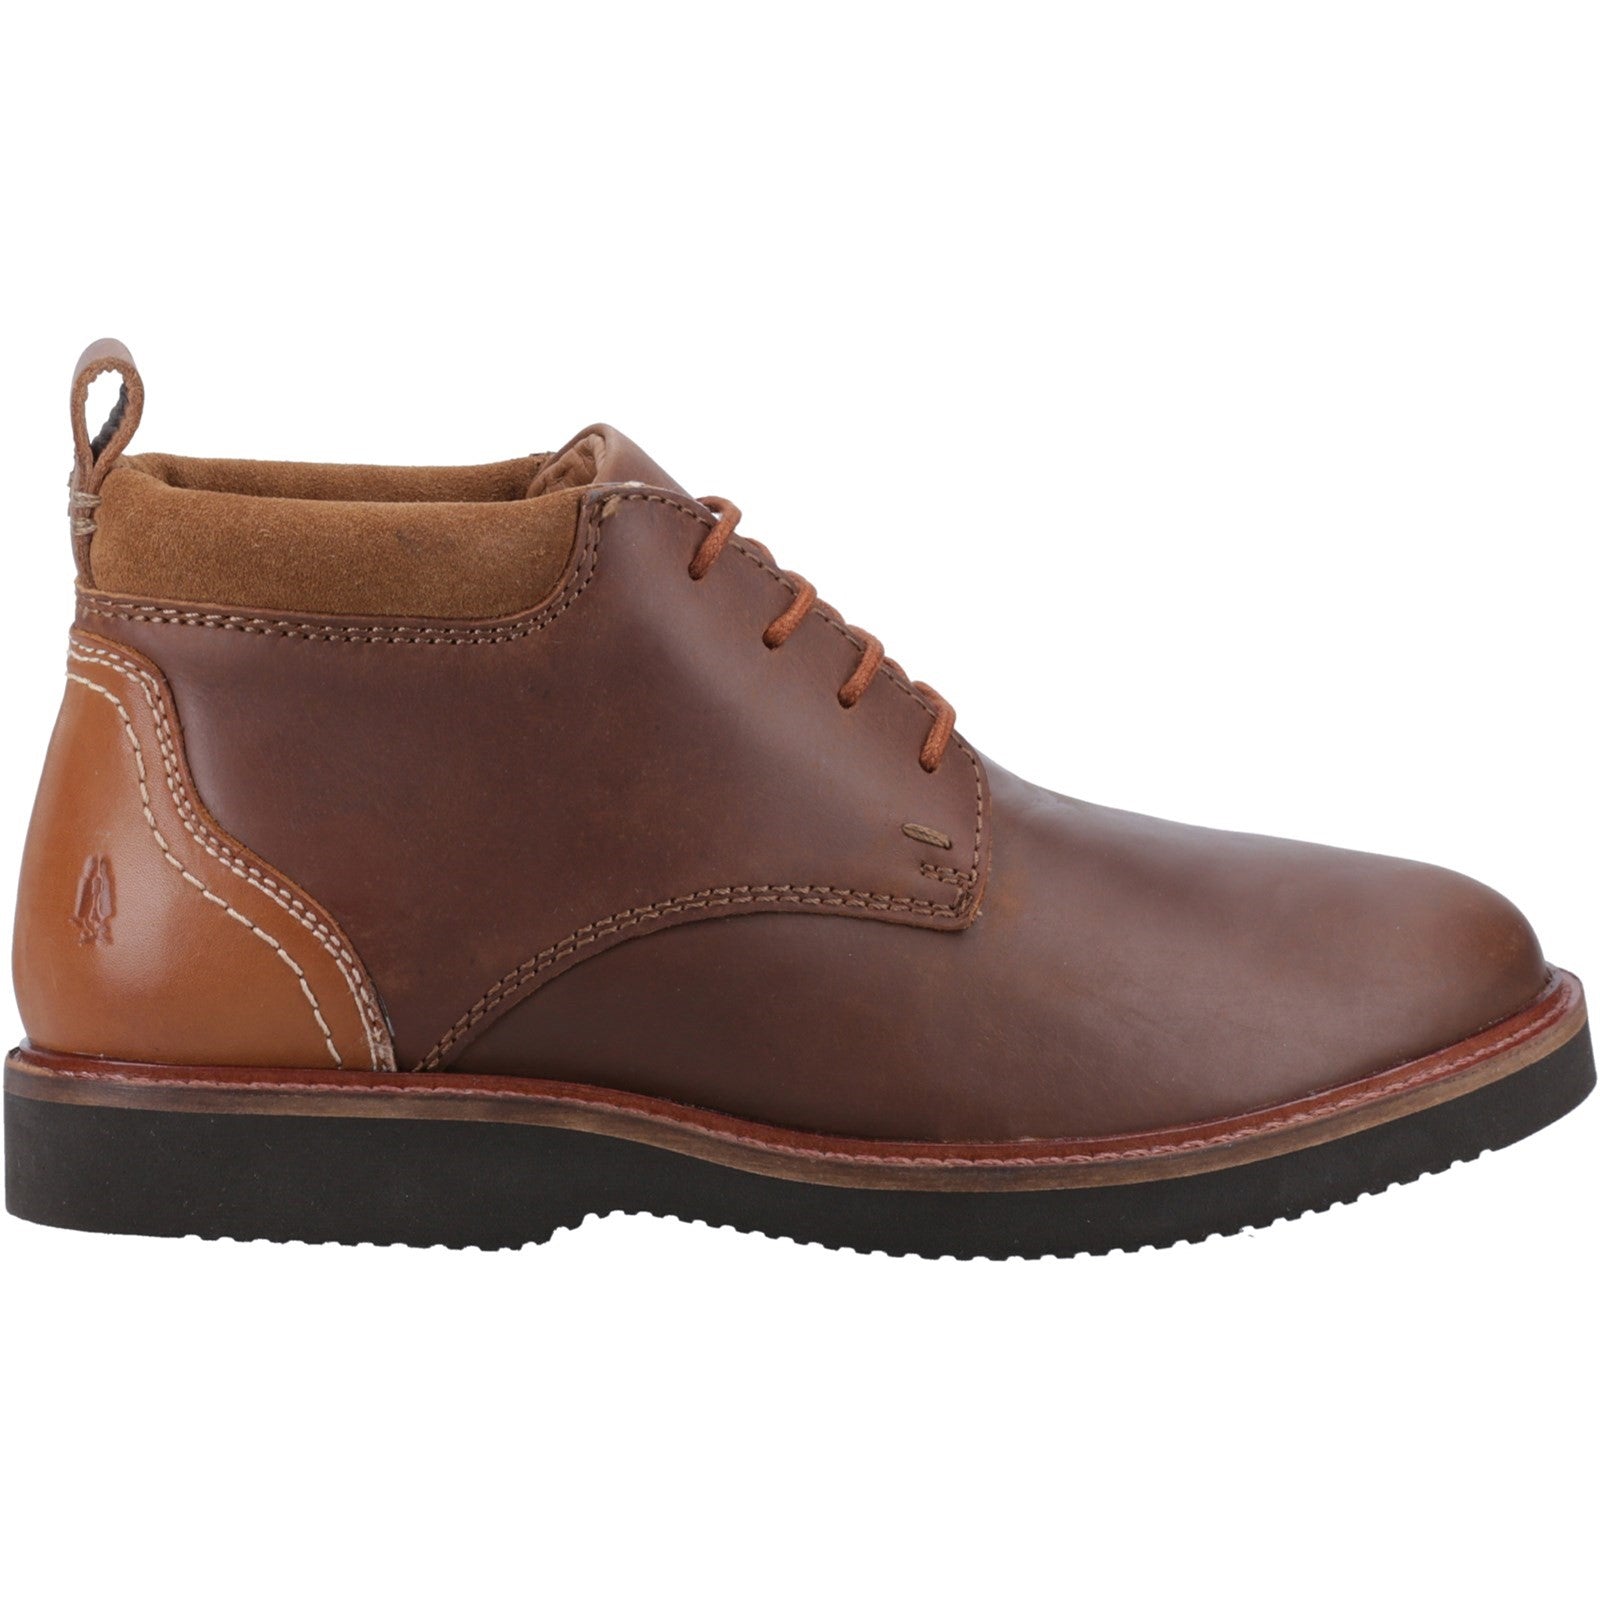 Hush Puppies Mens Wesley Leather Chukka Boots - Brown